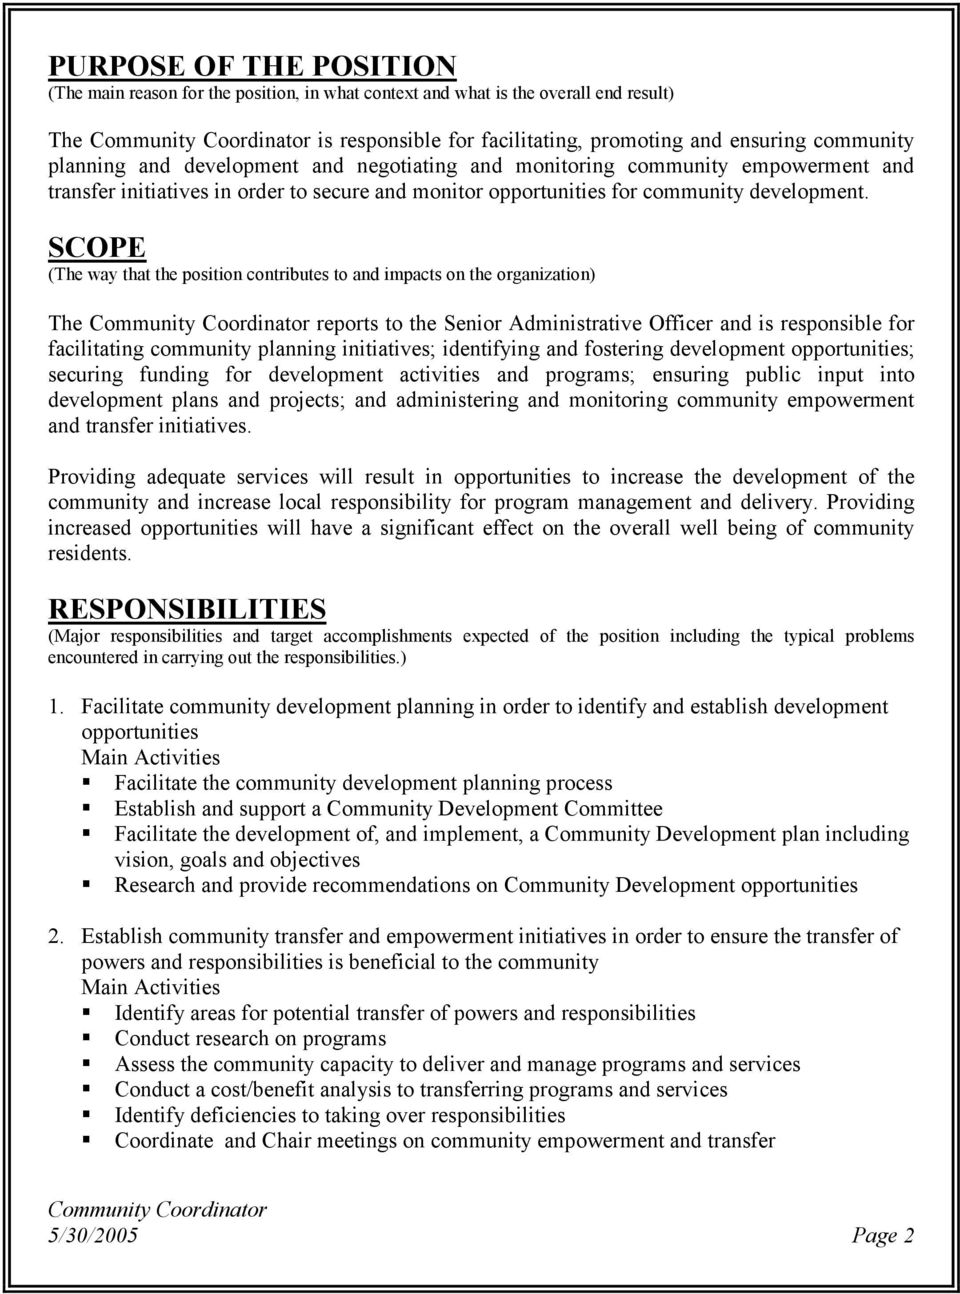 SCOPE (The way that the position contributes to and impacts on the organization) The reports to the Senior Administrative Officer and is responsible for facilitating community planning initiatives;